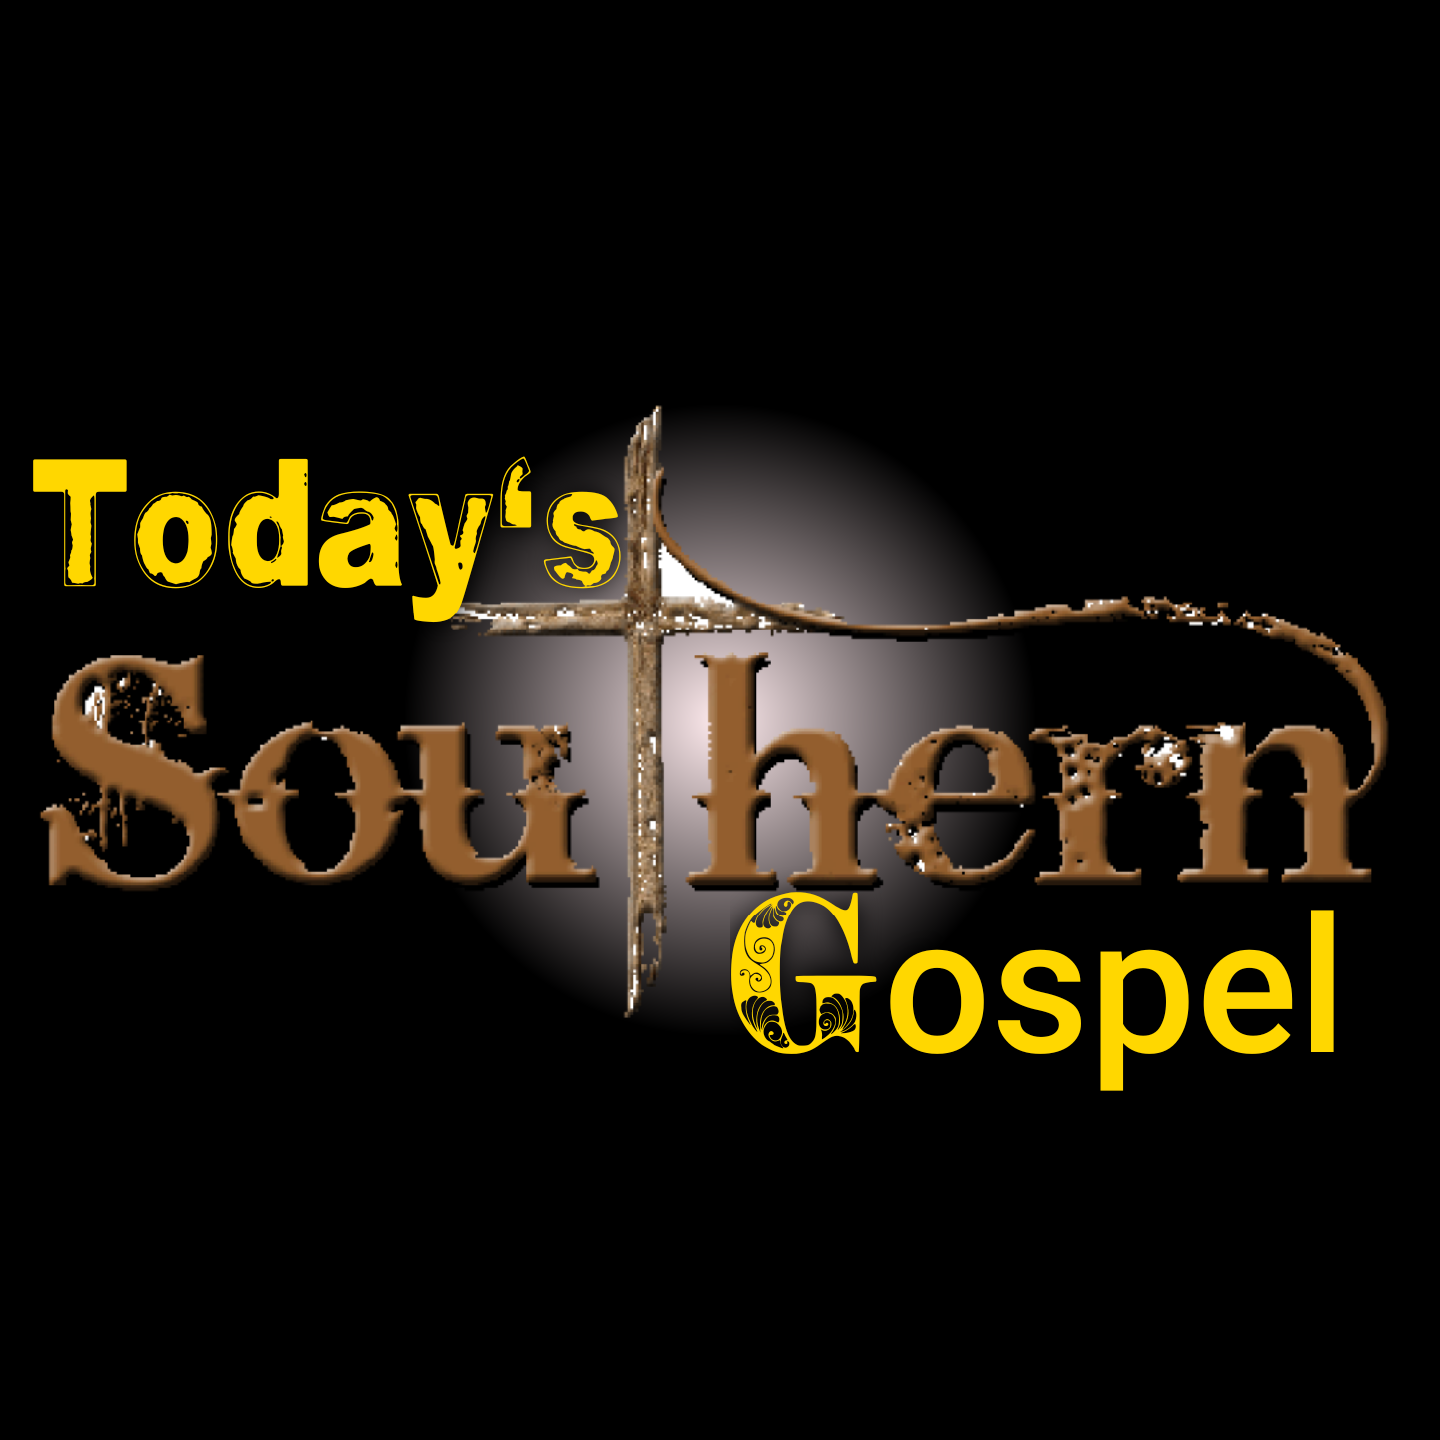 Today's Southern Gospel Music